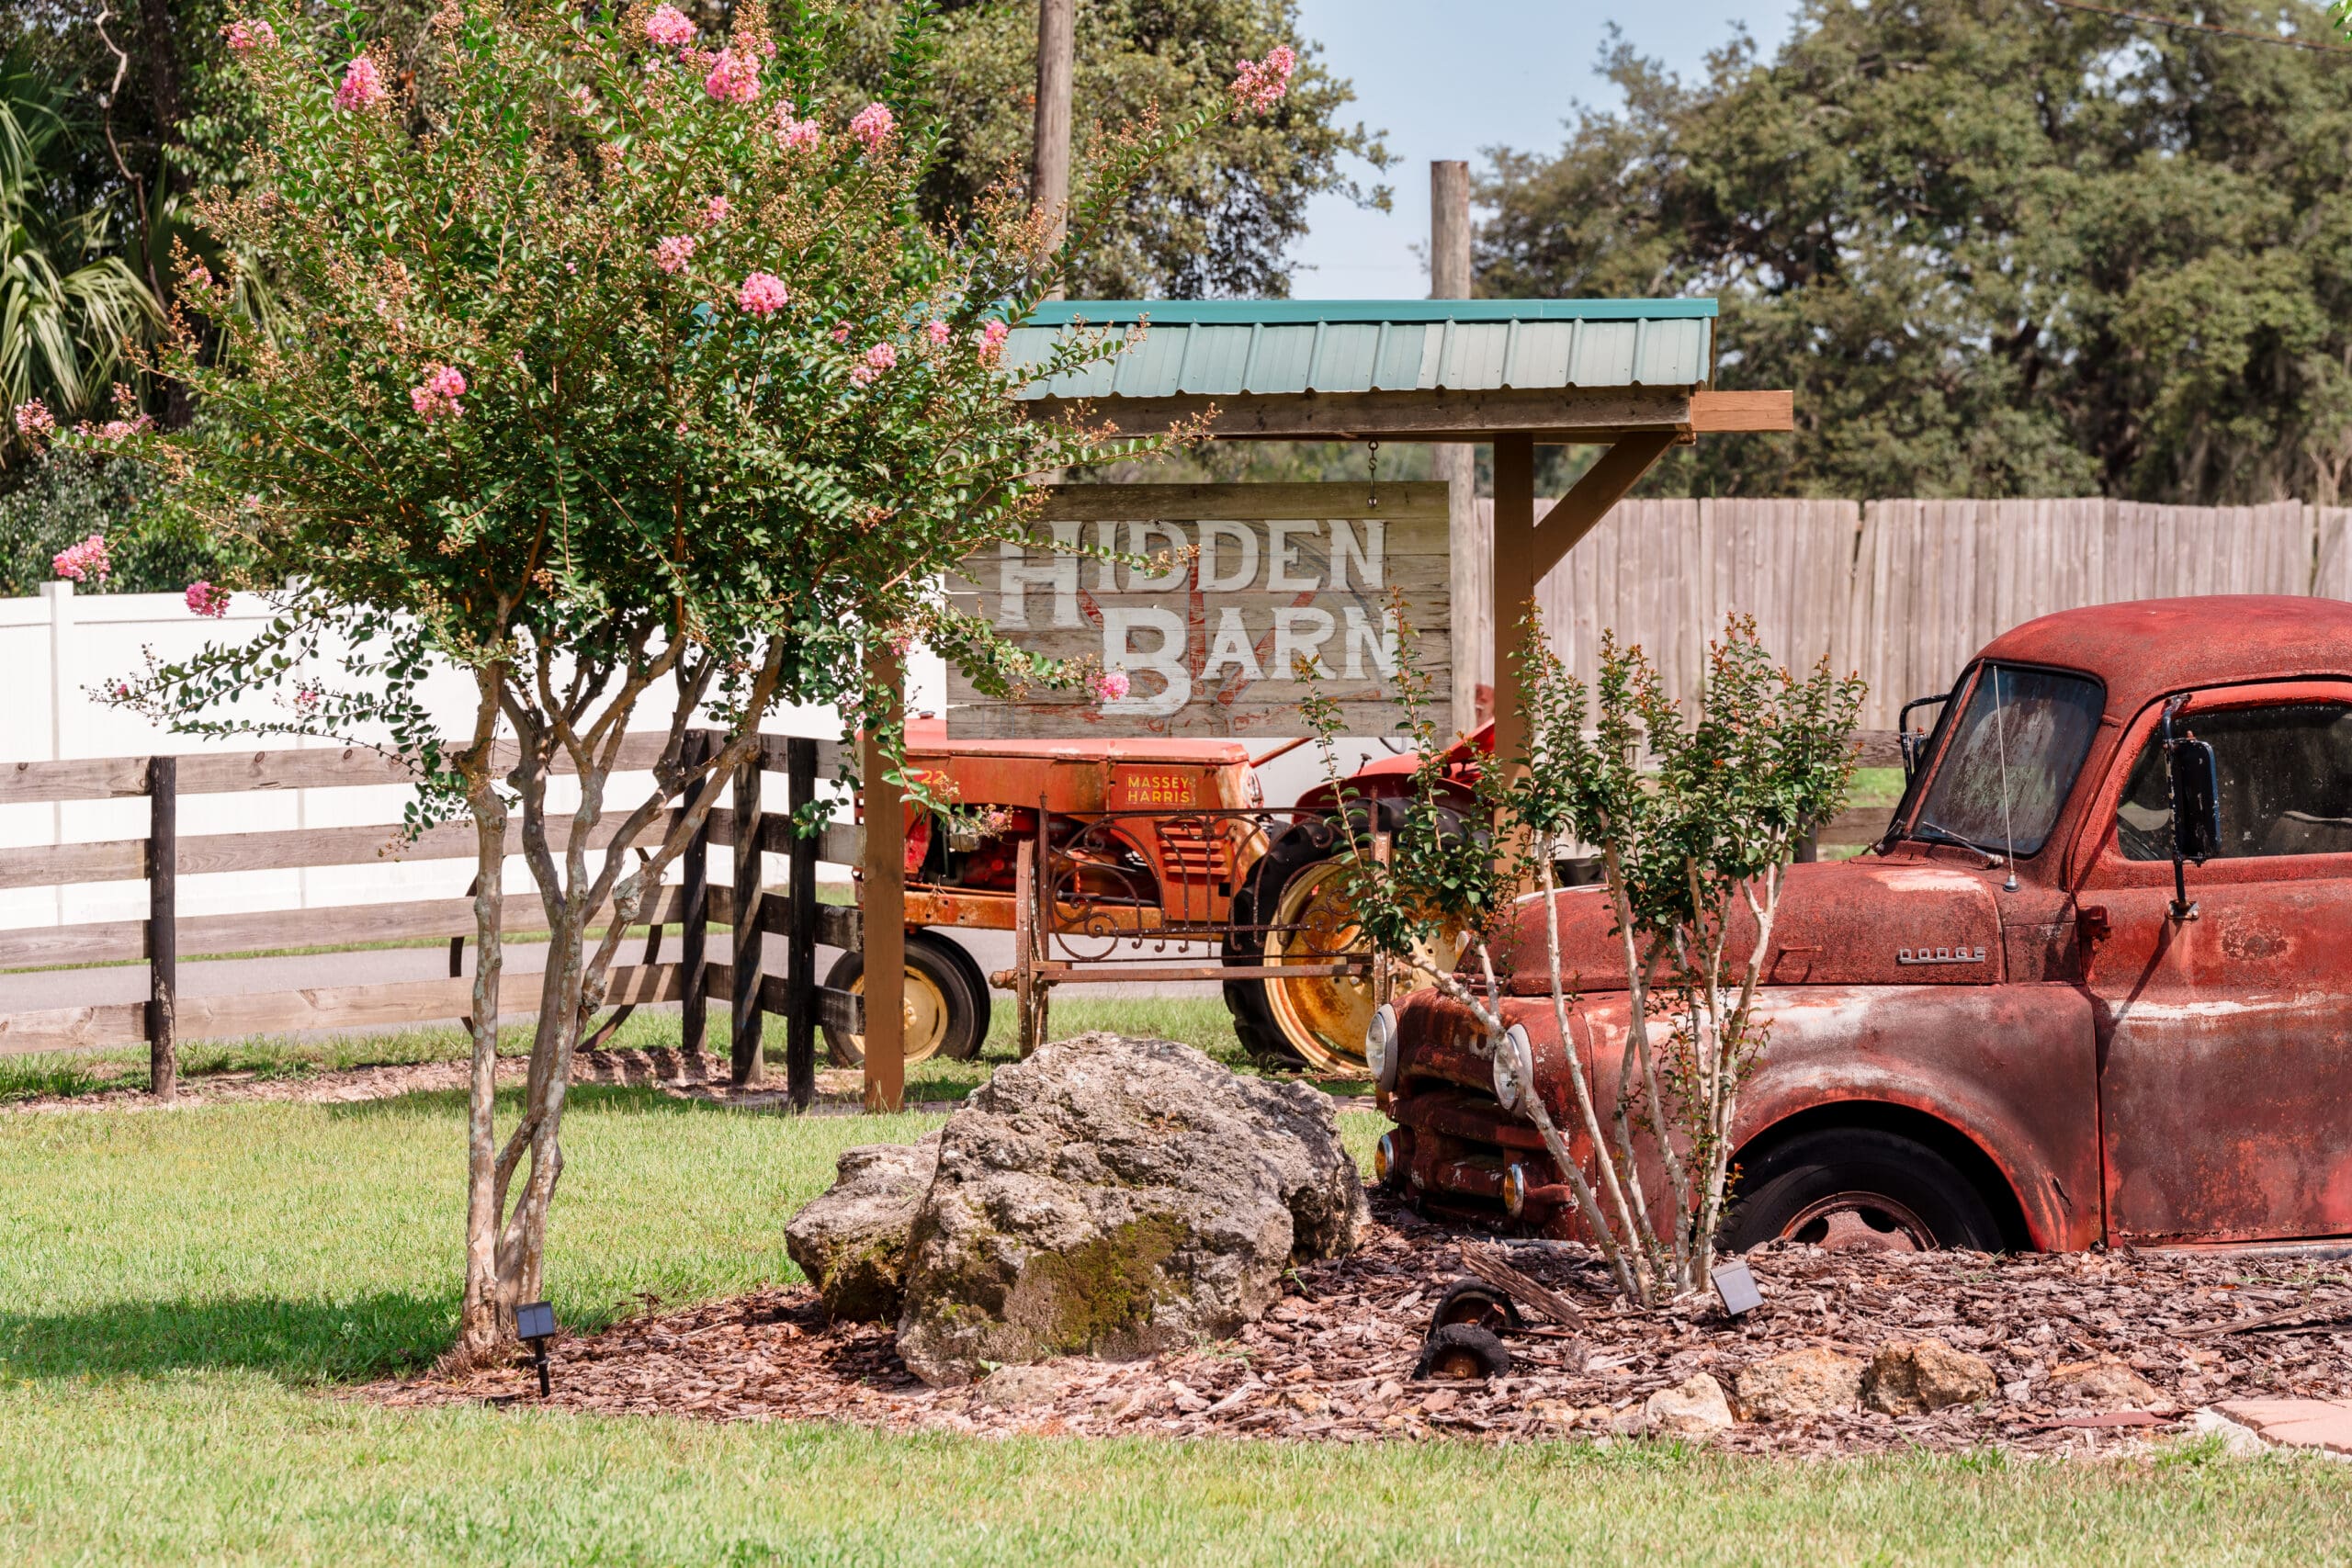 Close-up of Hidden Barn Sign Amongst Trees and Vintage Truck